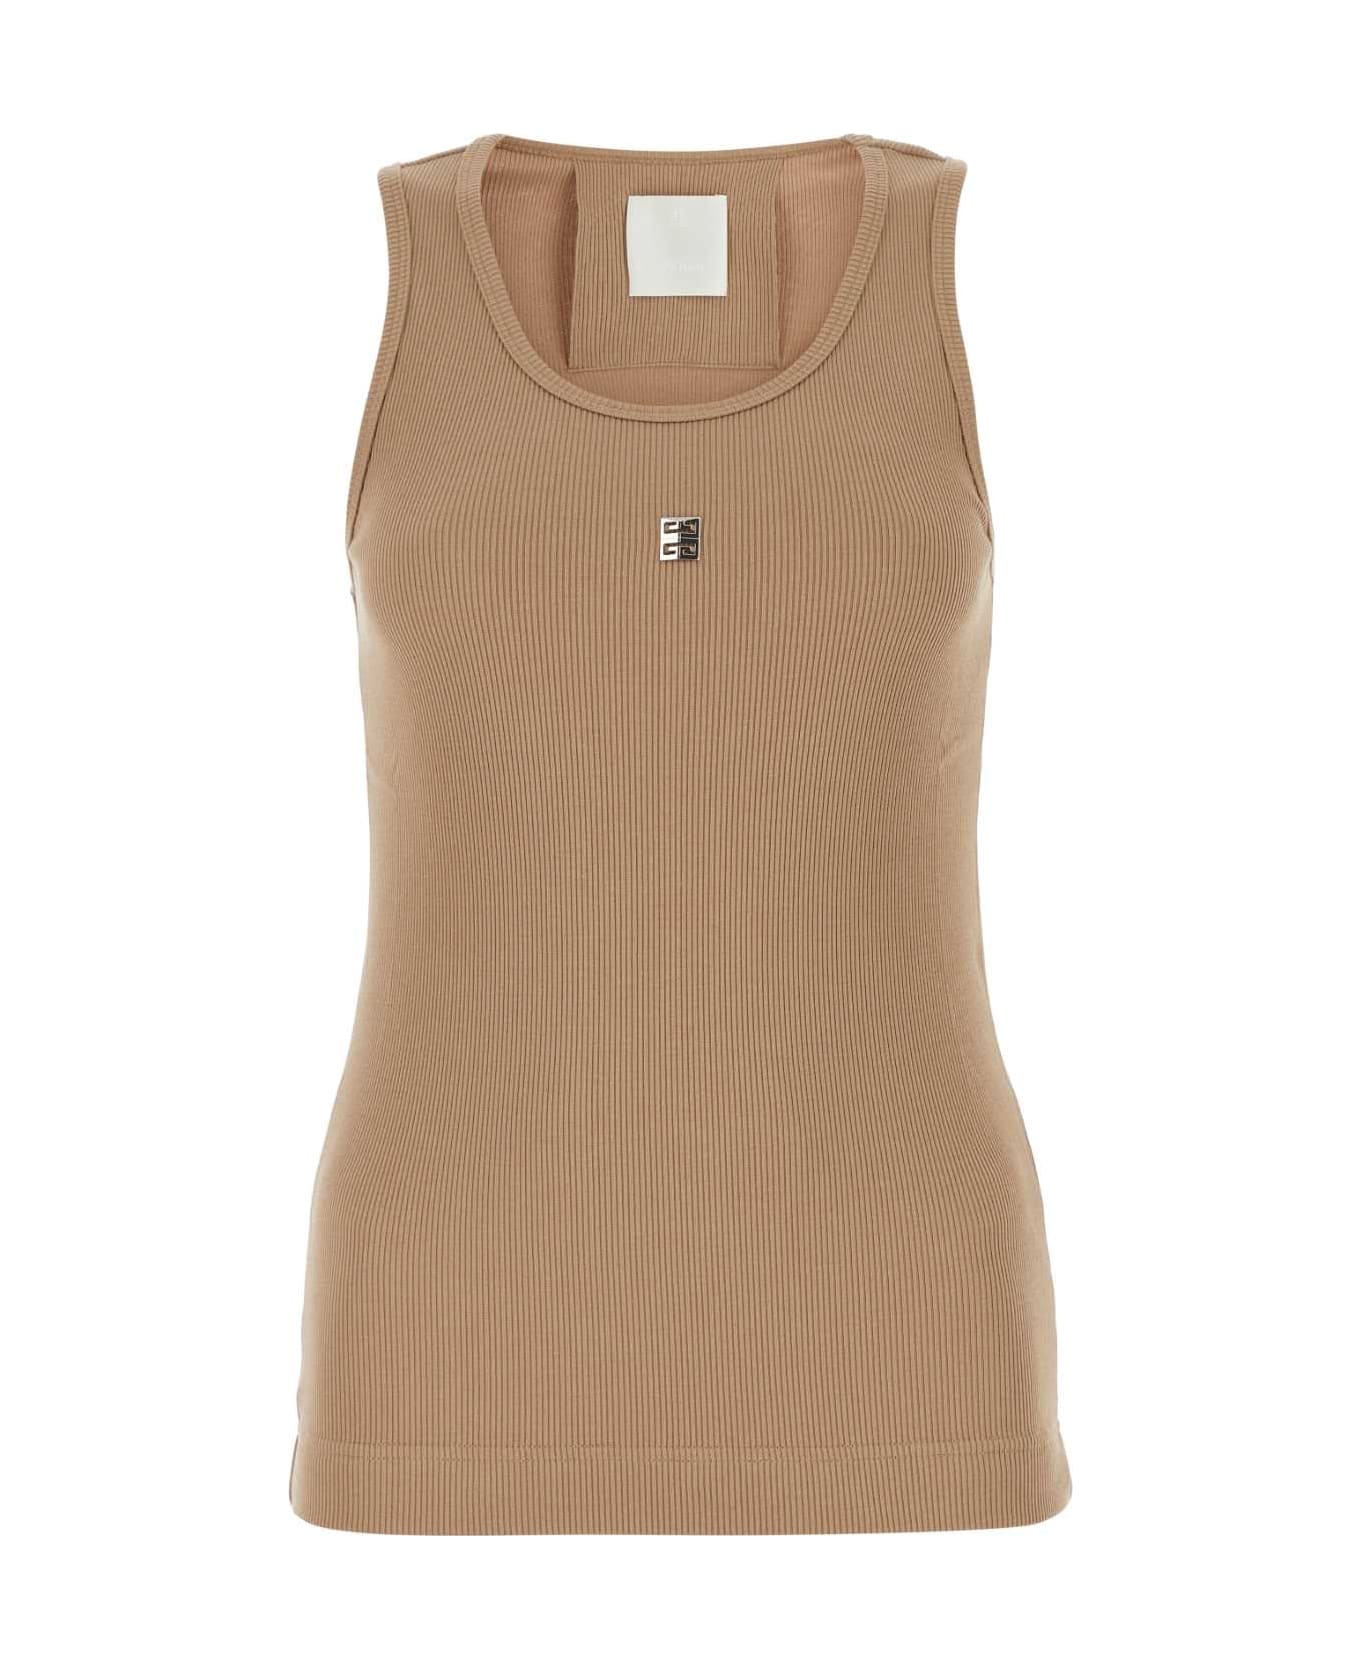 Givenchy Stretch Cotton Tank Top - BEIGECAPPUCCINO ベスト